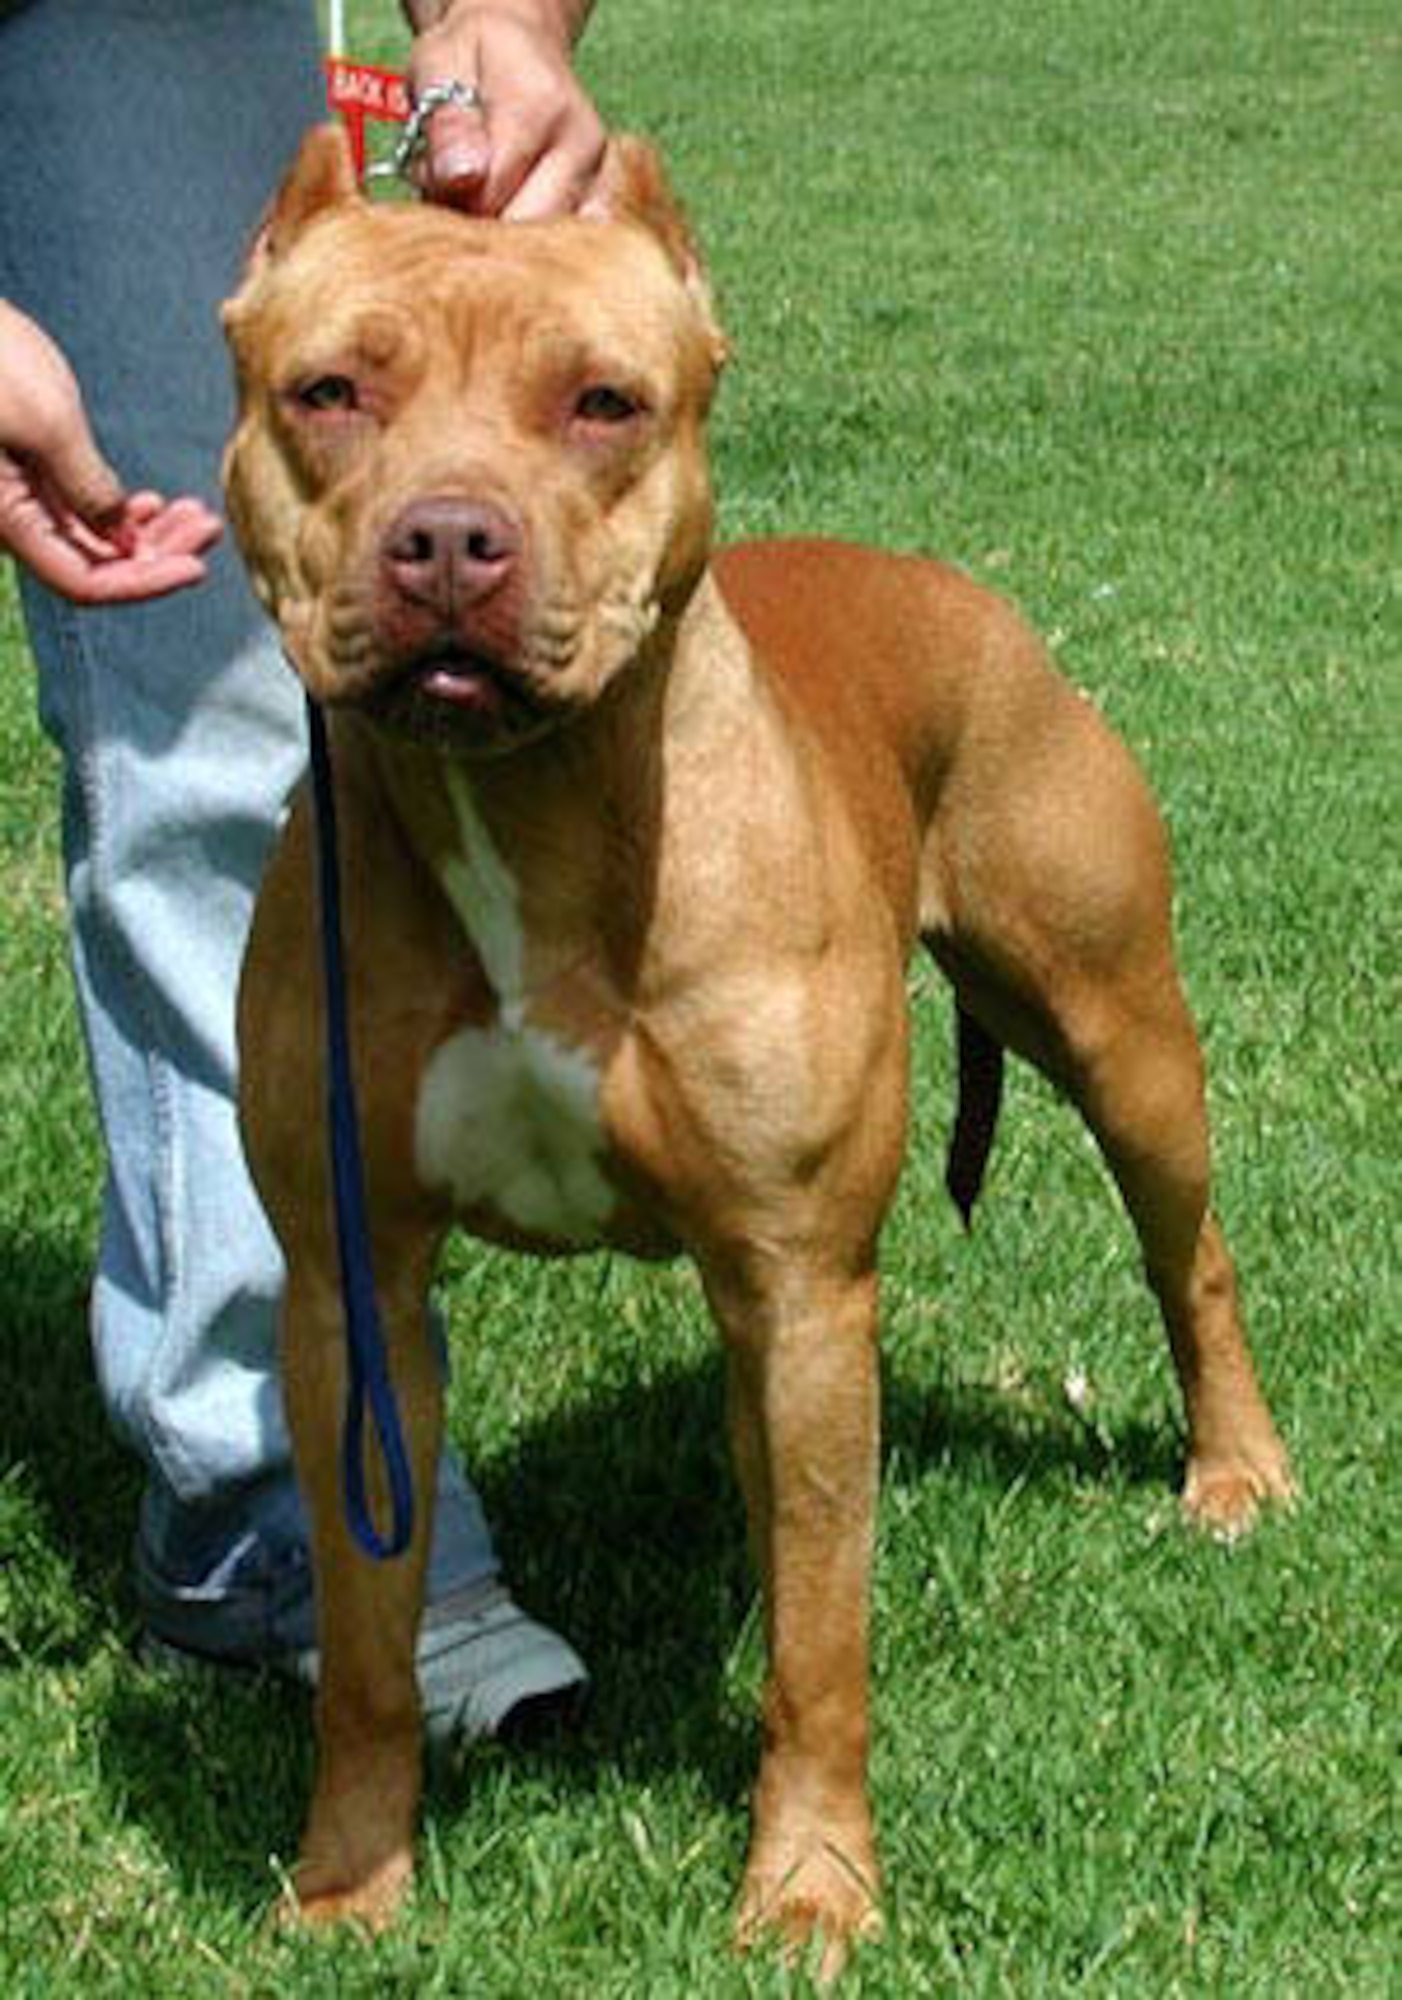 The Pit Bull is one of three breeds now banned from Ellsworth military family housing as of July 26. Pet policies came under change review after a pair of Pit Bulls attacked a servicemember's dependent in the Dakota Ridge housing area. The other two banned breeds are the Rottweiler and Doberman pinscher. (Courtesy photo/www.sjc.utah.gov) 